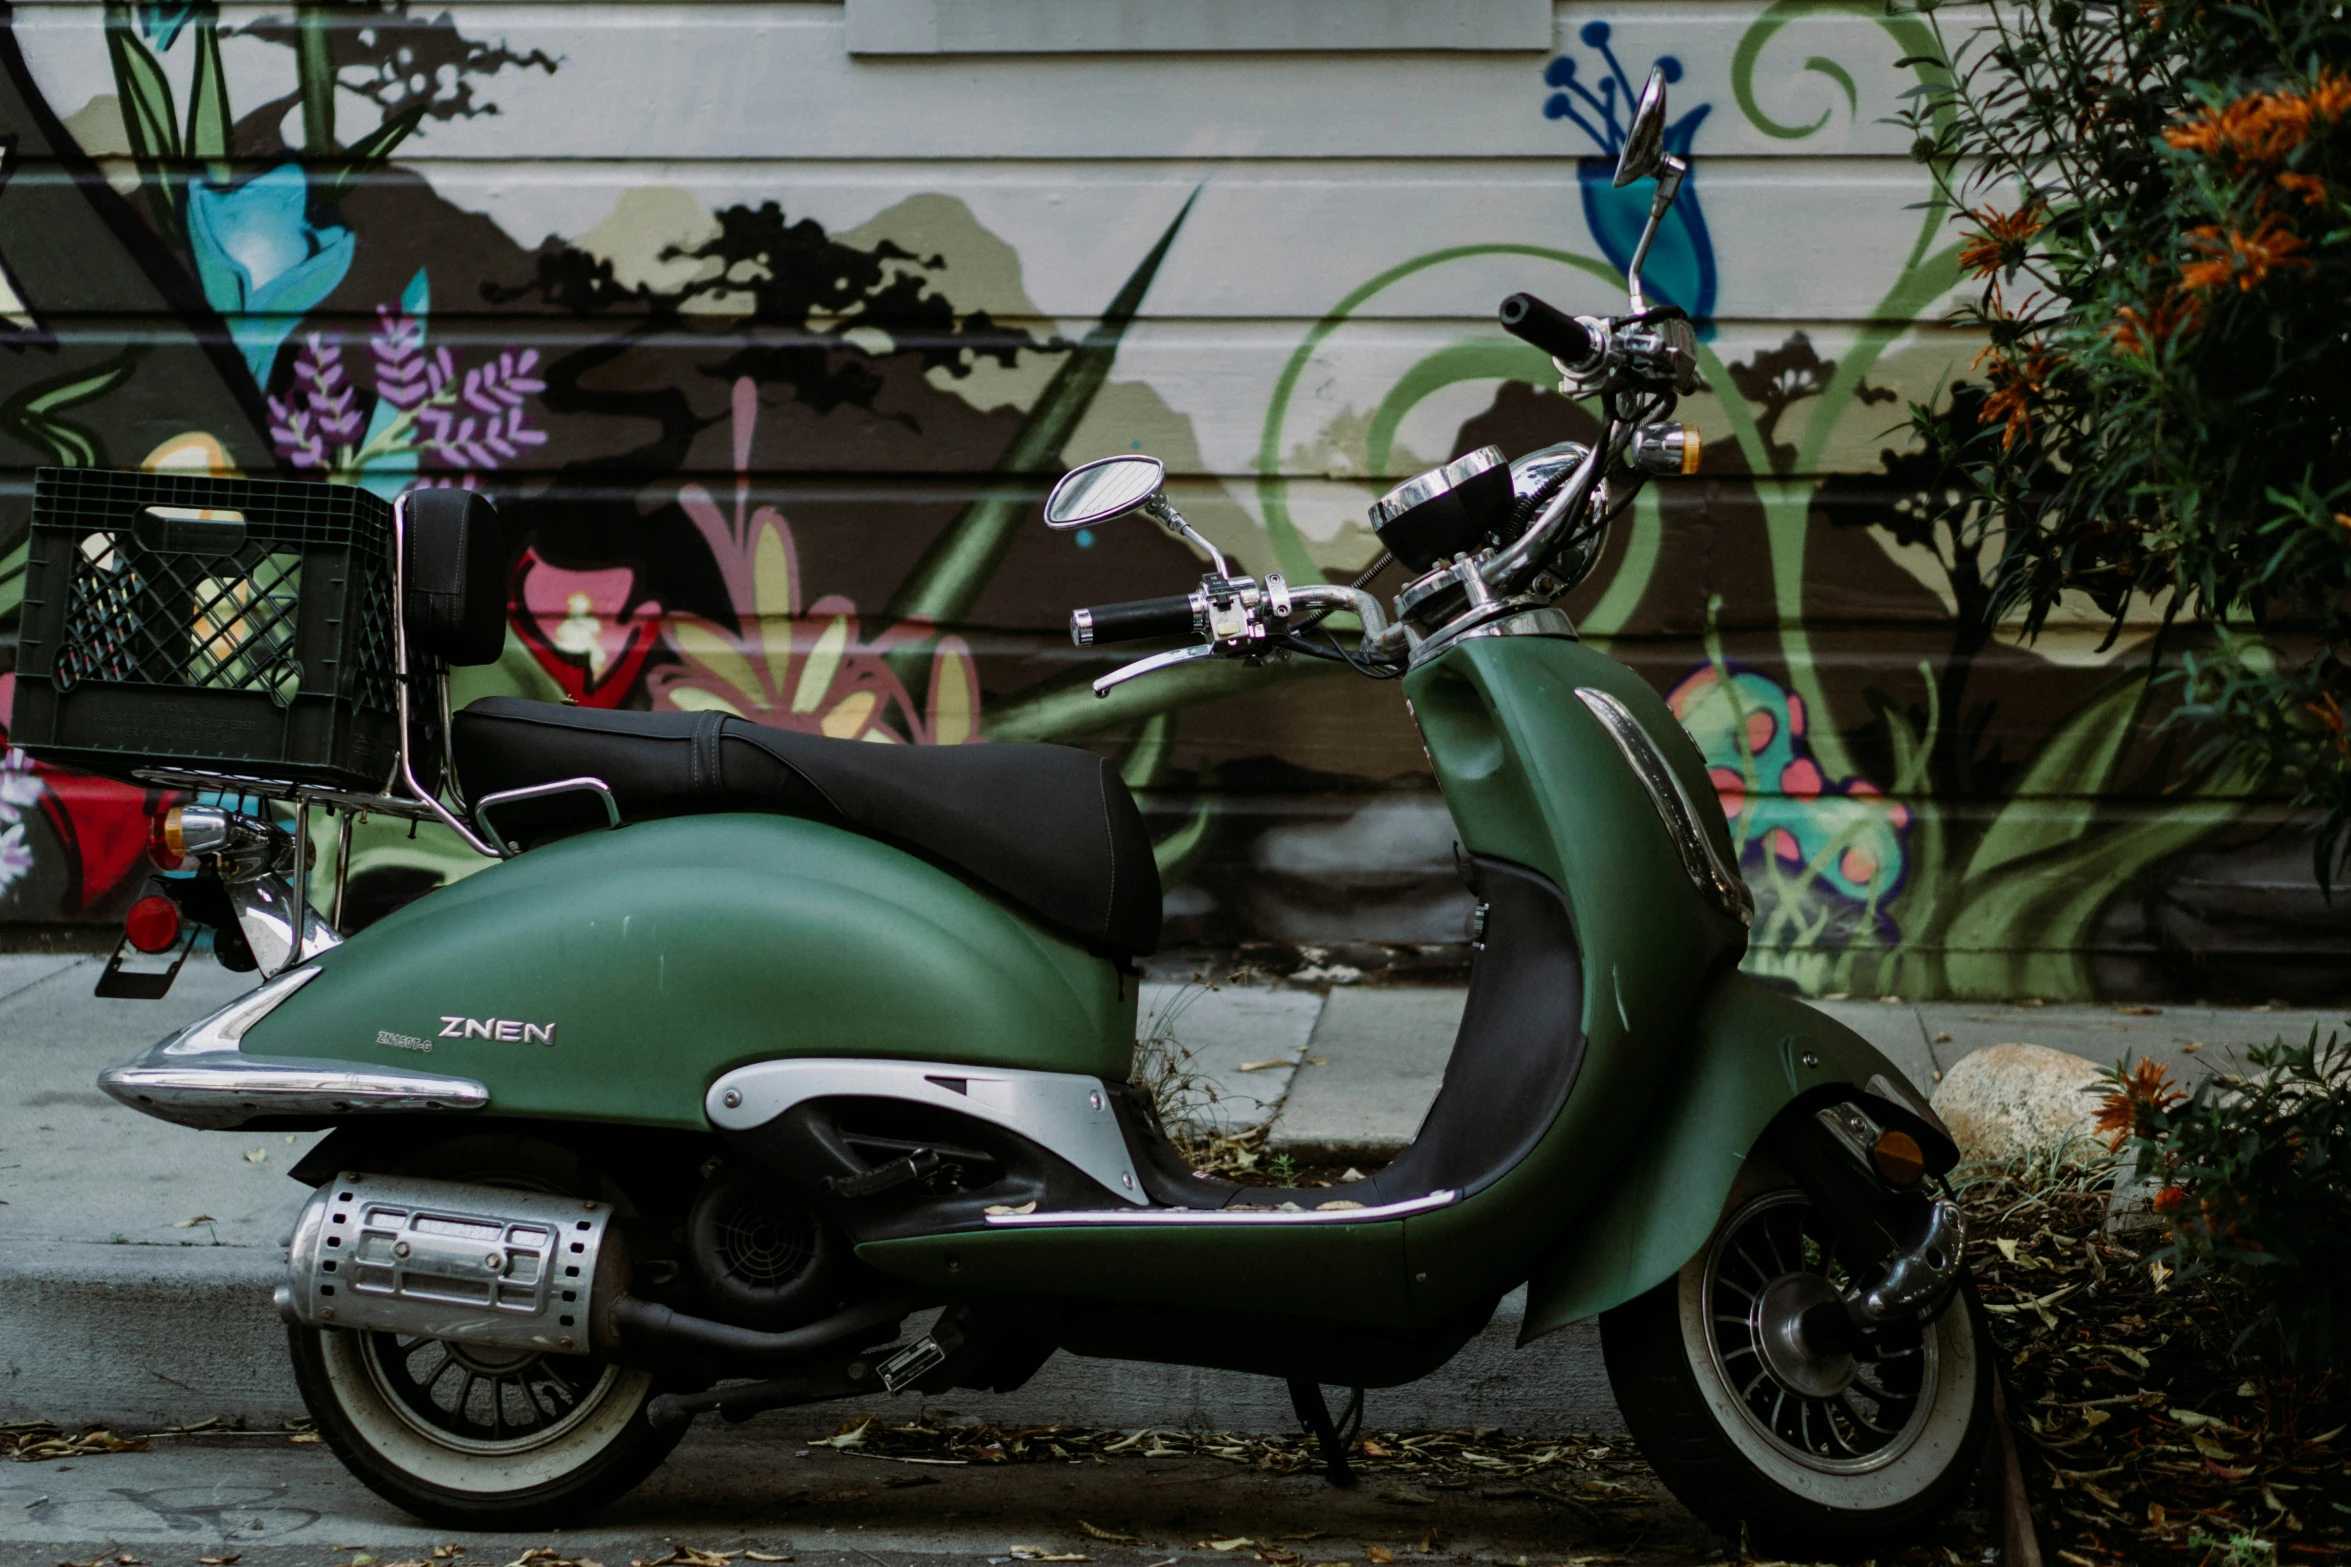 a very shiny green and black motorcycle in front of graffiti